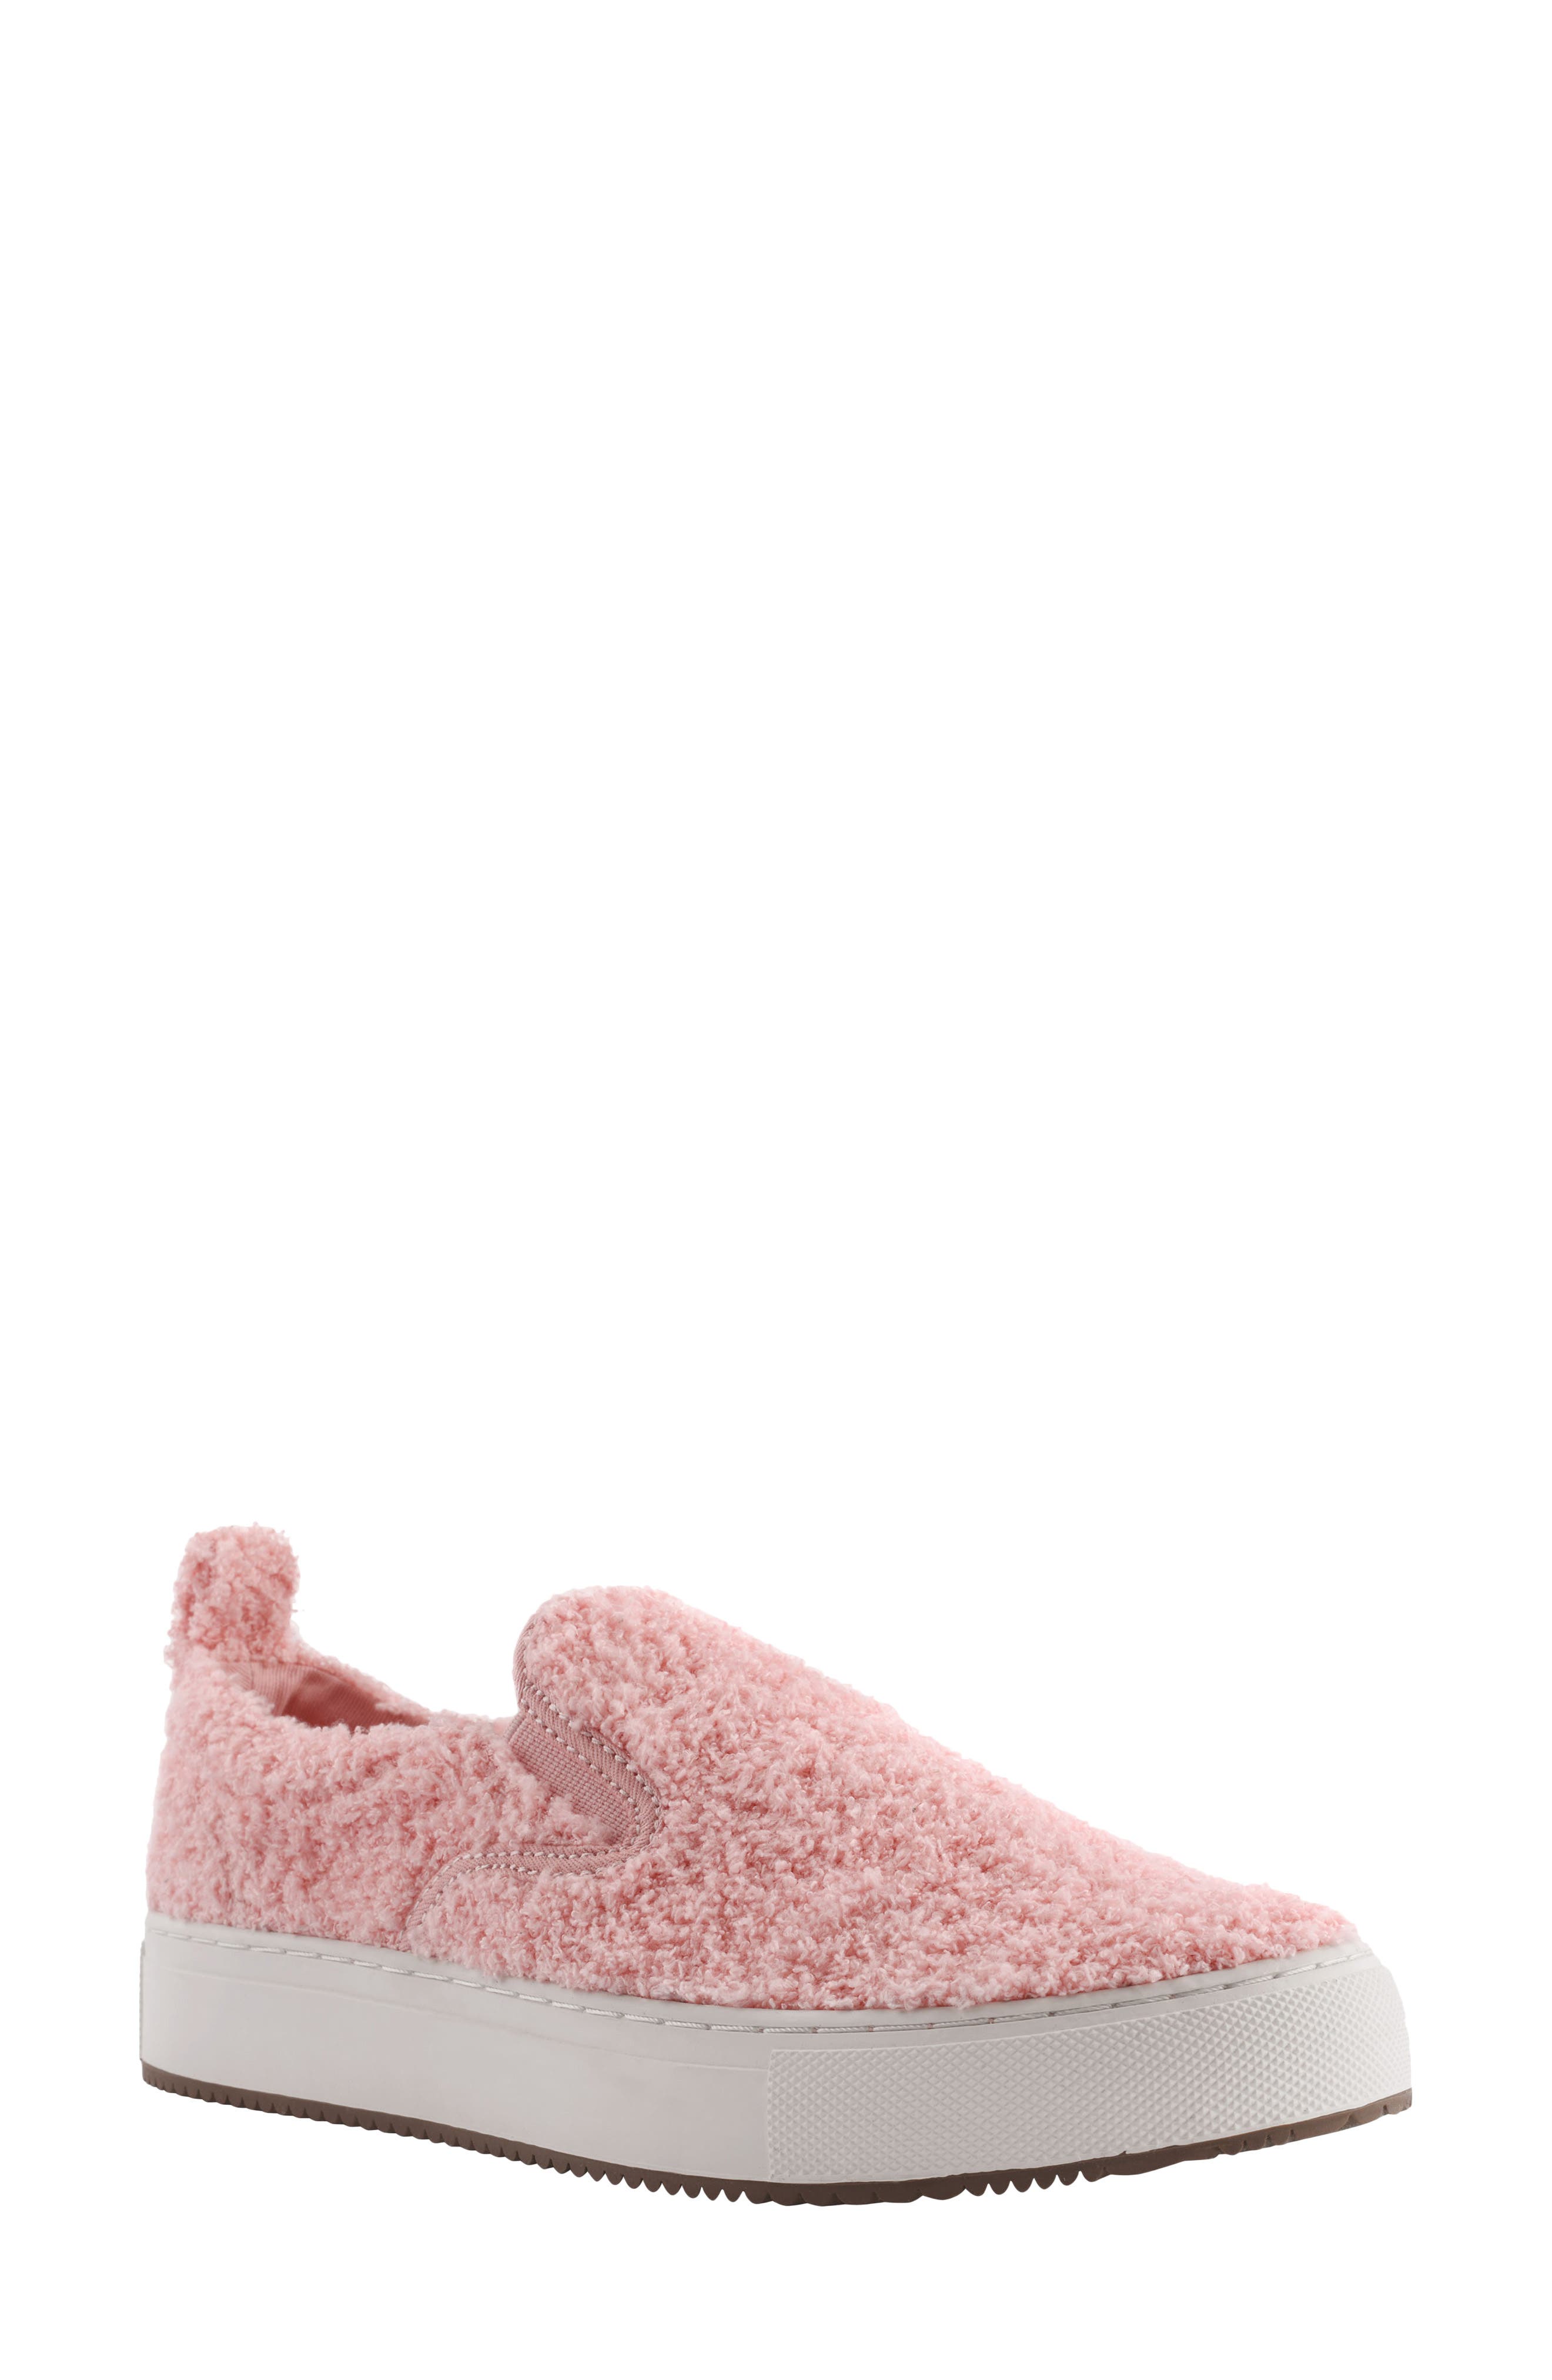 Marc Fisher Ltd Cassee Slip-on Sneaker In New Blushing Fabric